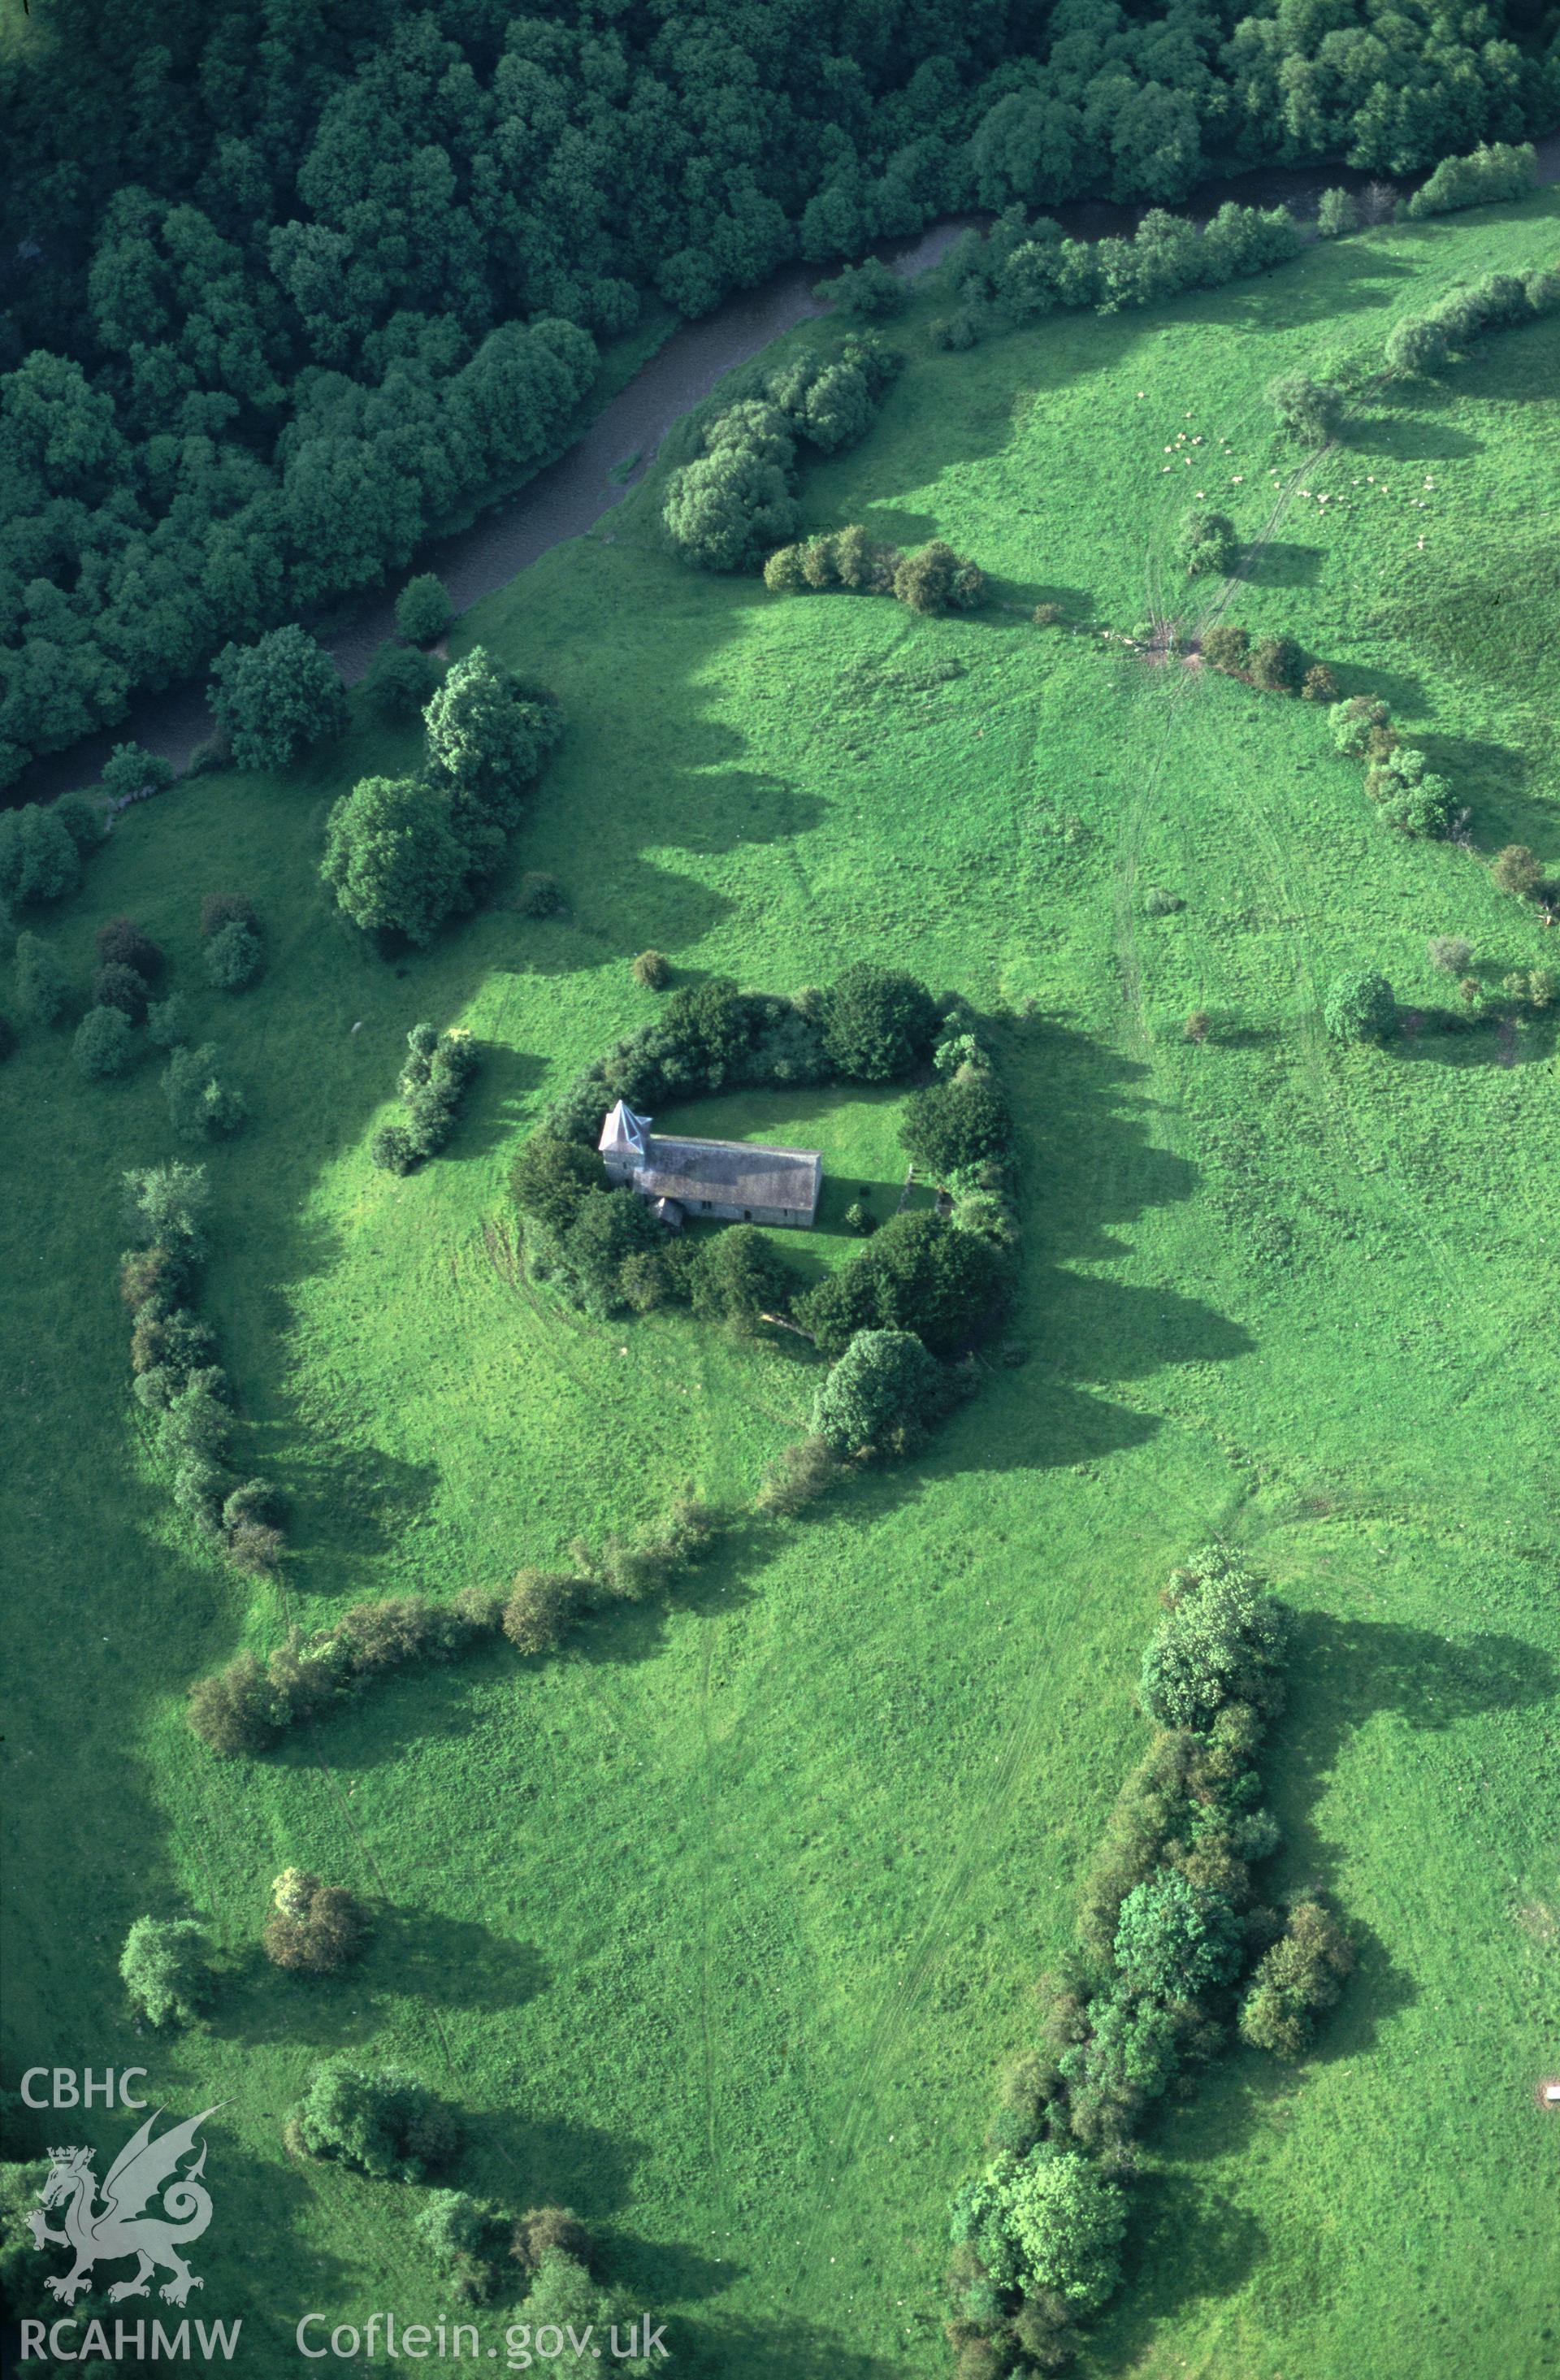 Slide of RCAHMW colour oblique aerial photograph of Cefnllys Medieval Settlement, taken by T.G. Driver, 19/6/1998.